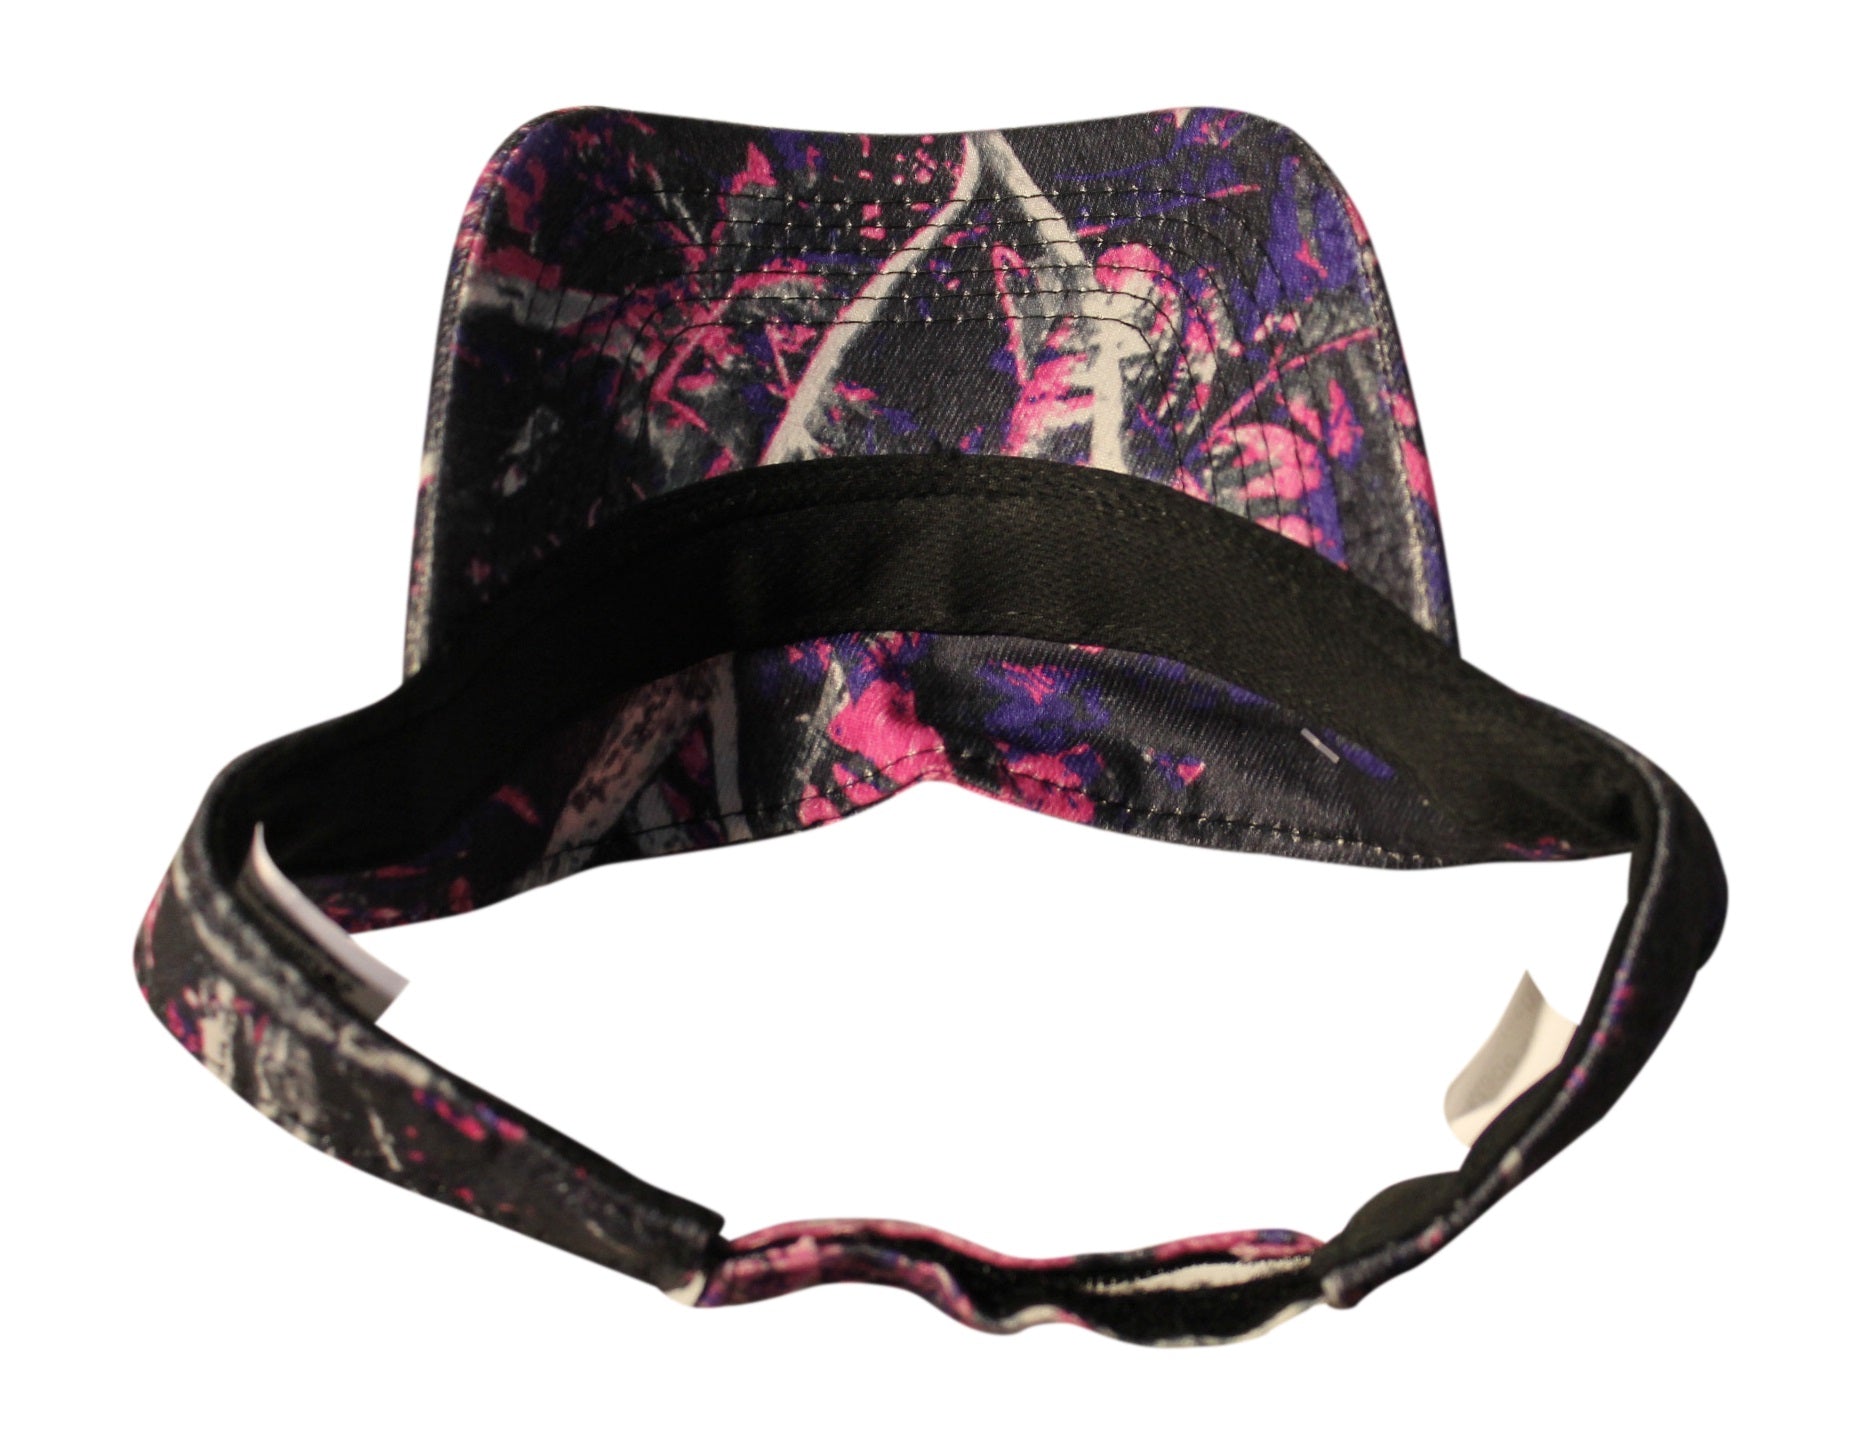 Muddy Girl Pink Camo Camouflage Visor Cap Hat with Wicking